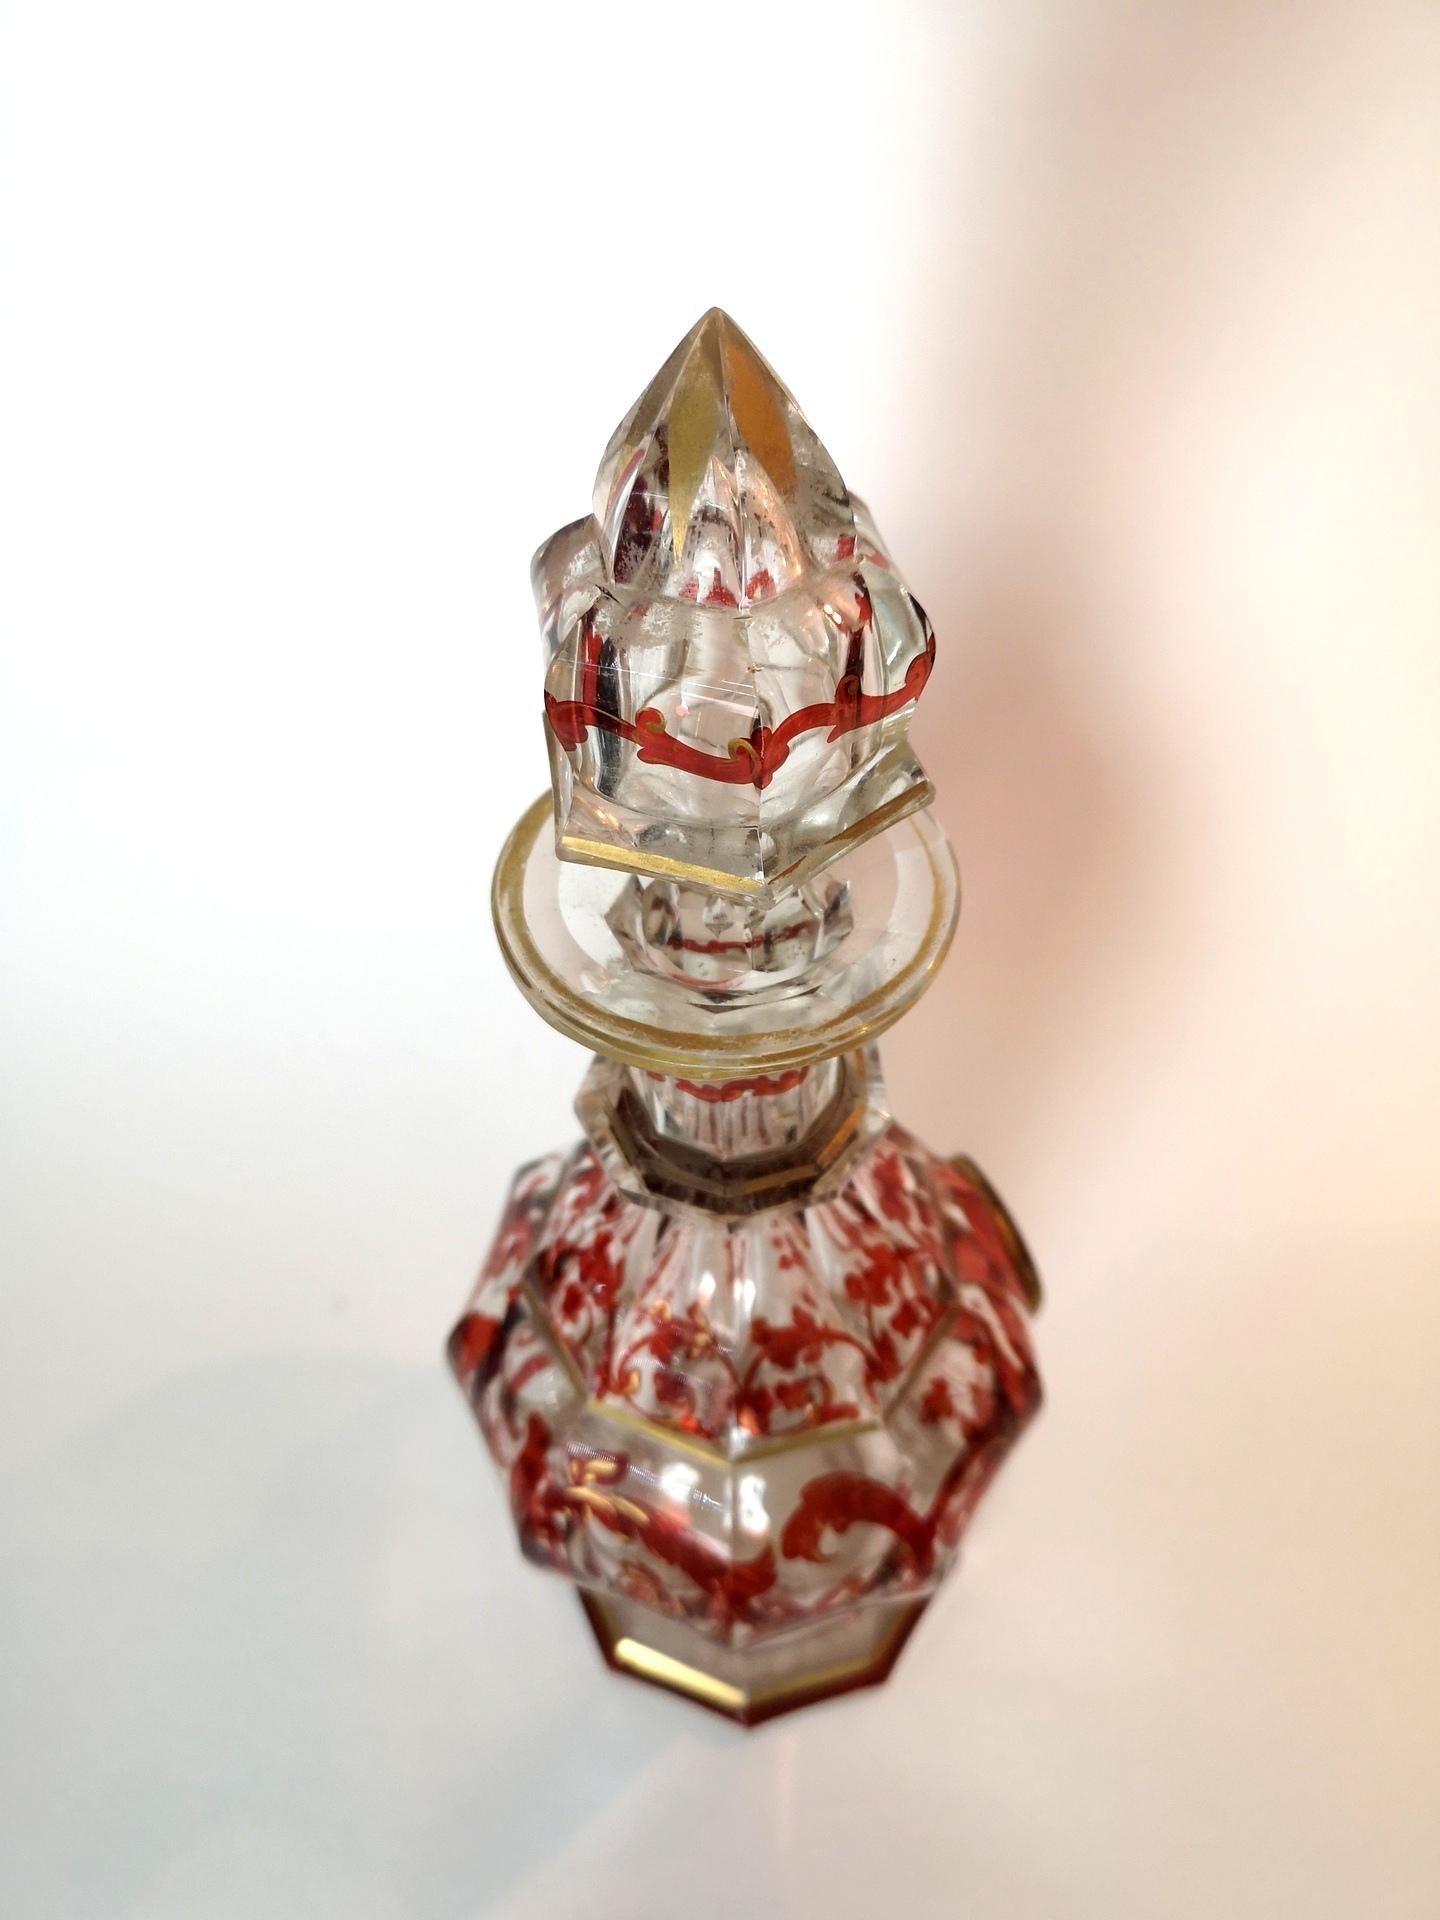 This beautiful Biedermeier decanter features a red hand-painted grapevine pattern, which is complemented elegantly with the modest gold plated decorations. A classy addition to your liquor cabinet for wine or any spirits of choice. The styling of